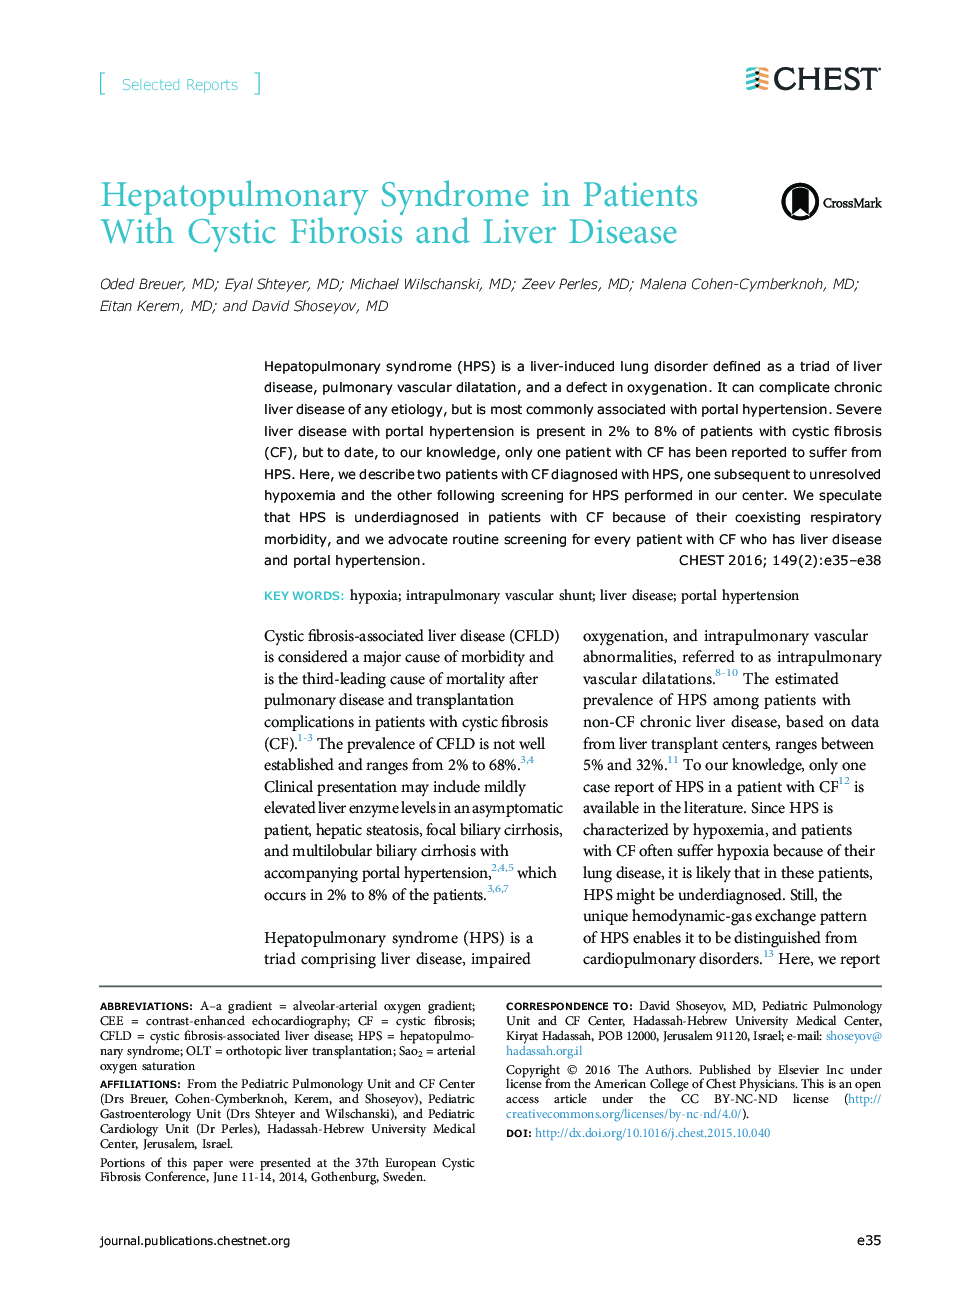 Hepatopulmonary Syndrome in Patients With Cystic Fibrosis and Liver Disease